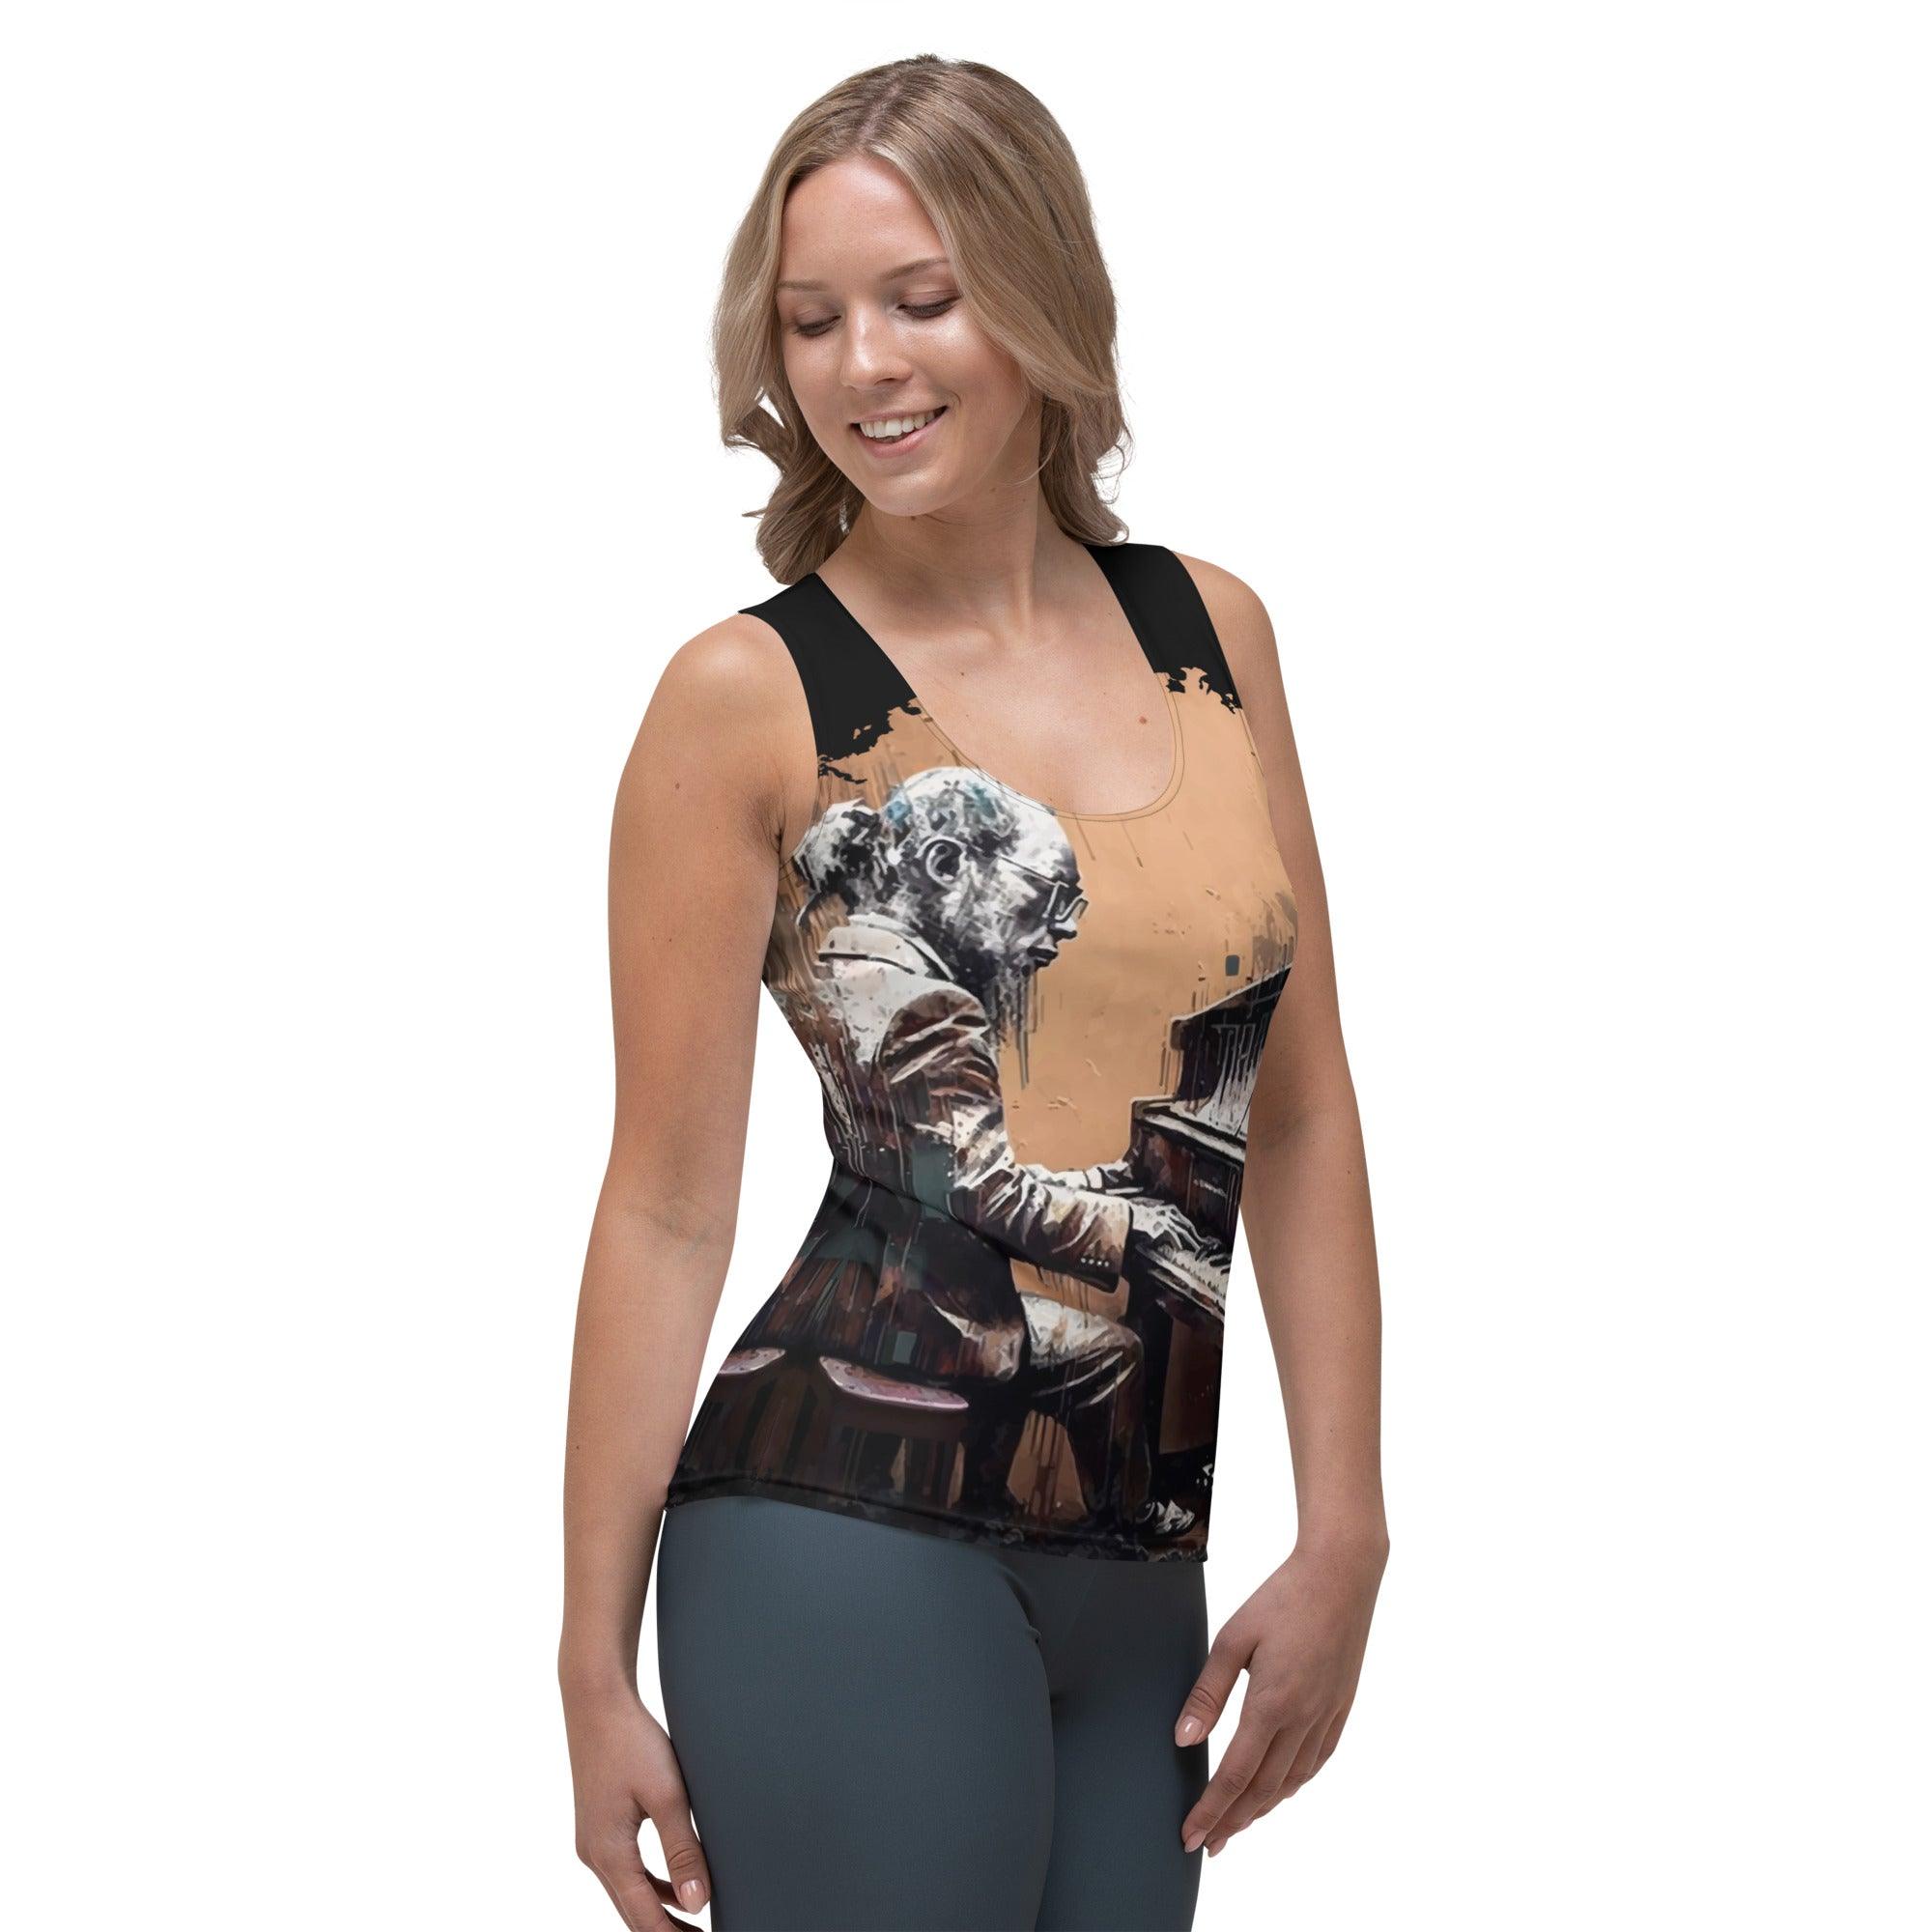 Gettin' Jazzy On Piano Sublimation Cut & Sew Tank Top - Beyond T-shirts